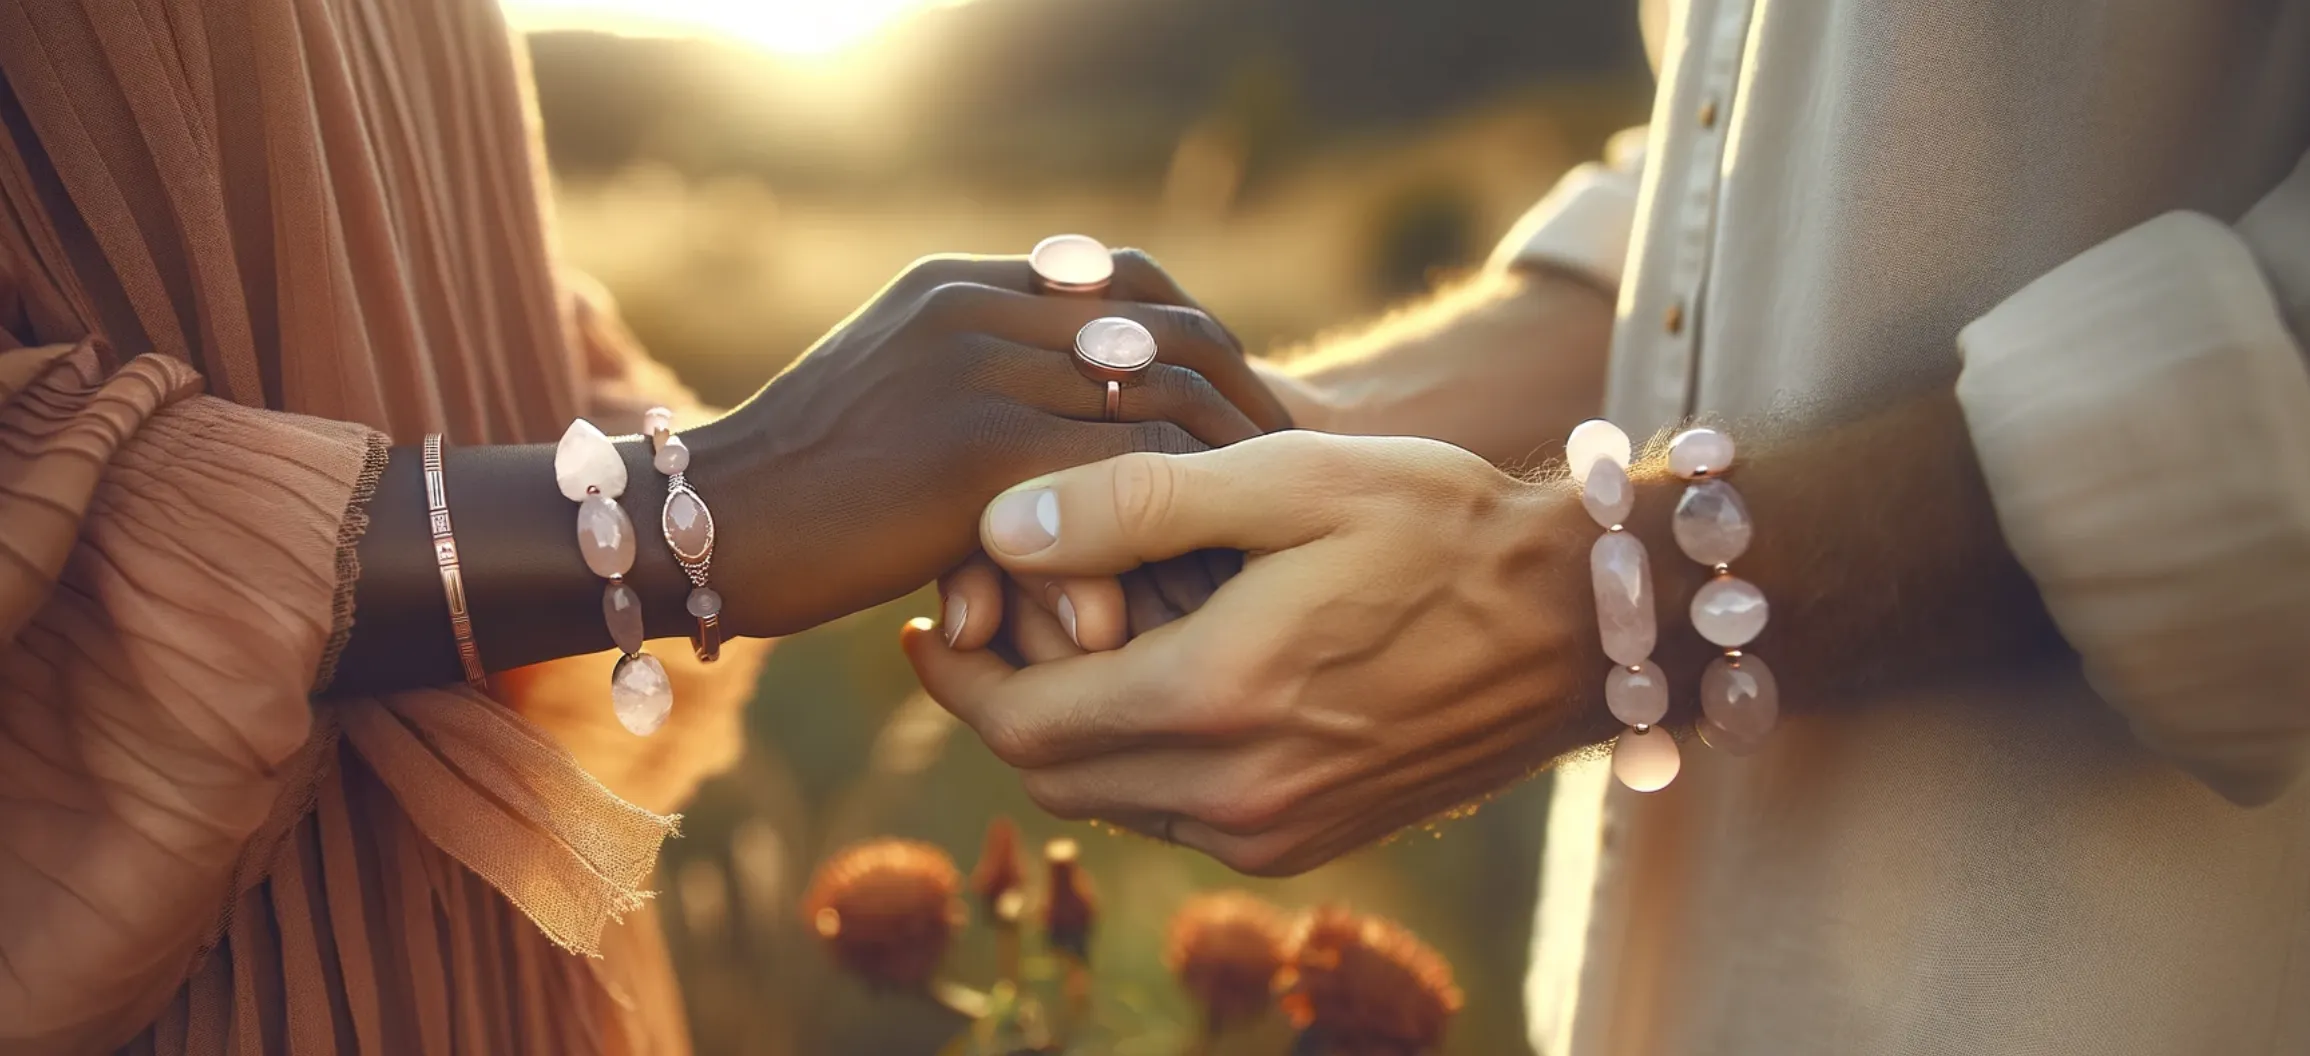 black and white person holding hands wearing rose quartz jewellery